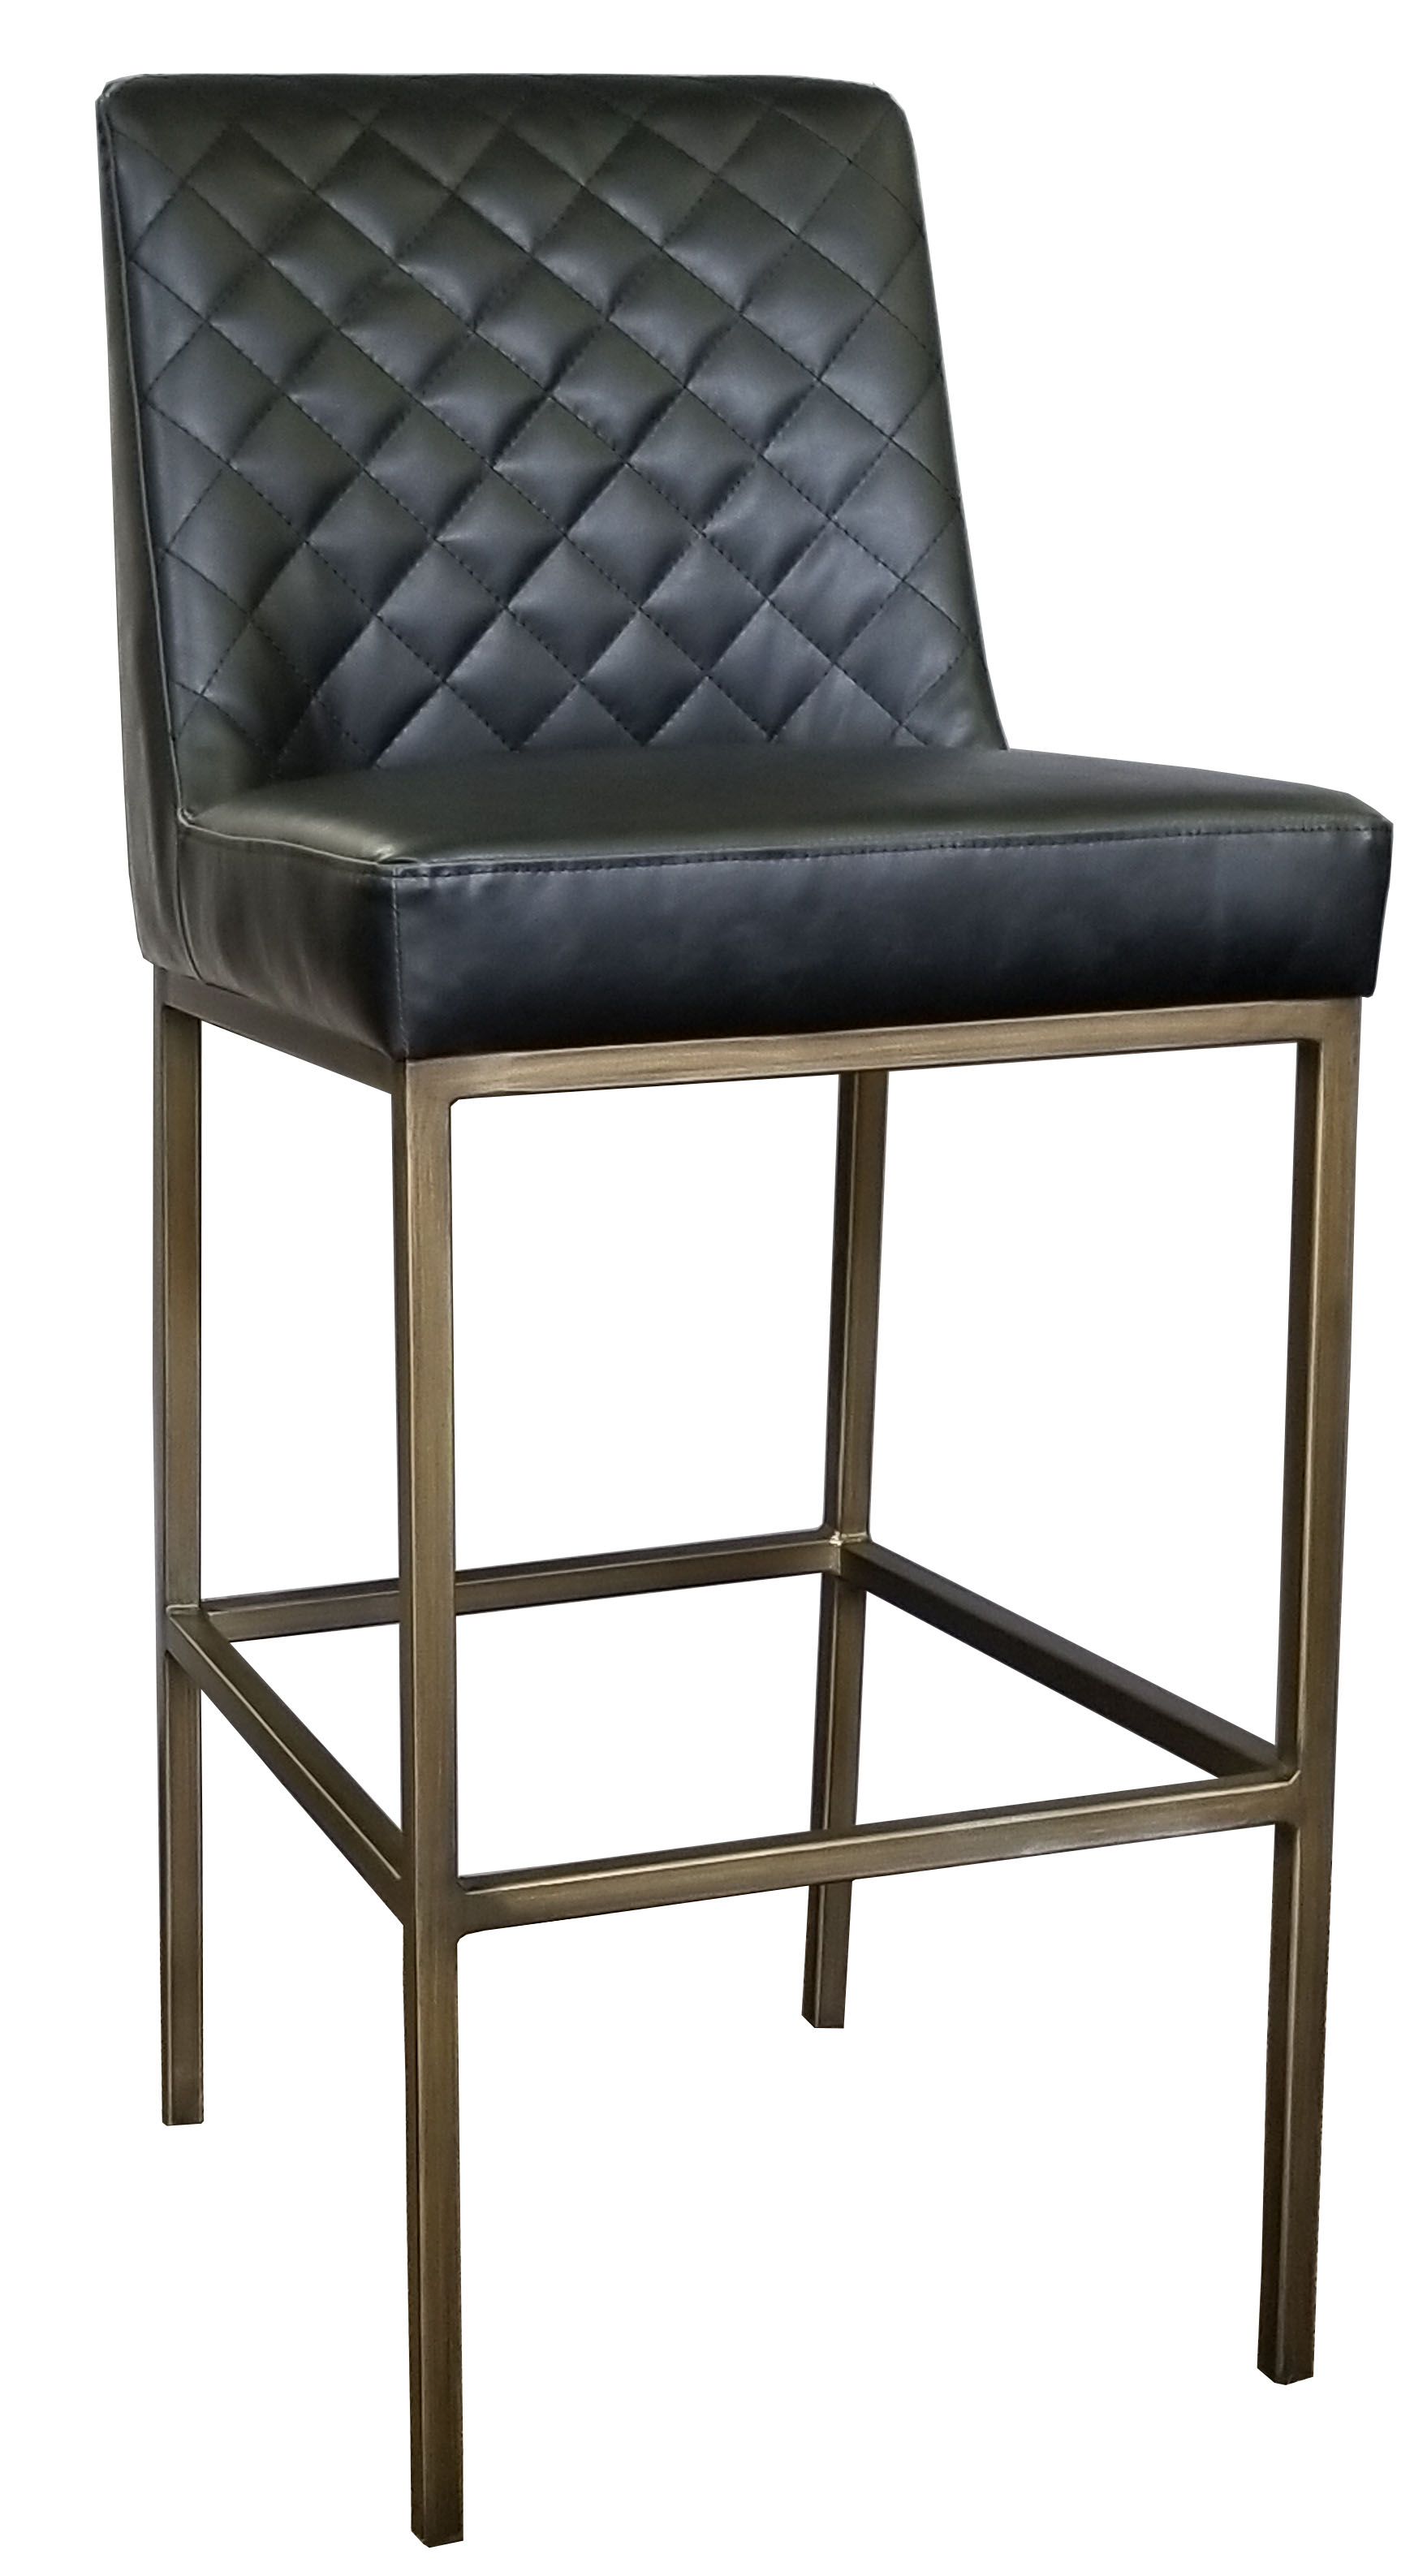 Black Leather Bar Stool, Black Leather Bar Stools With Arms